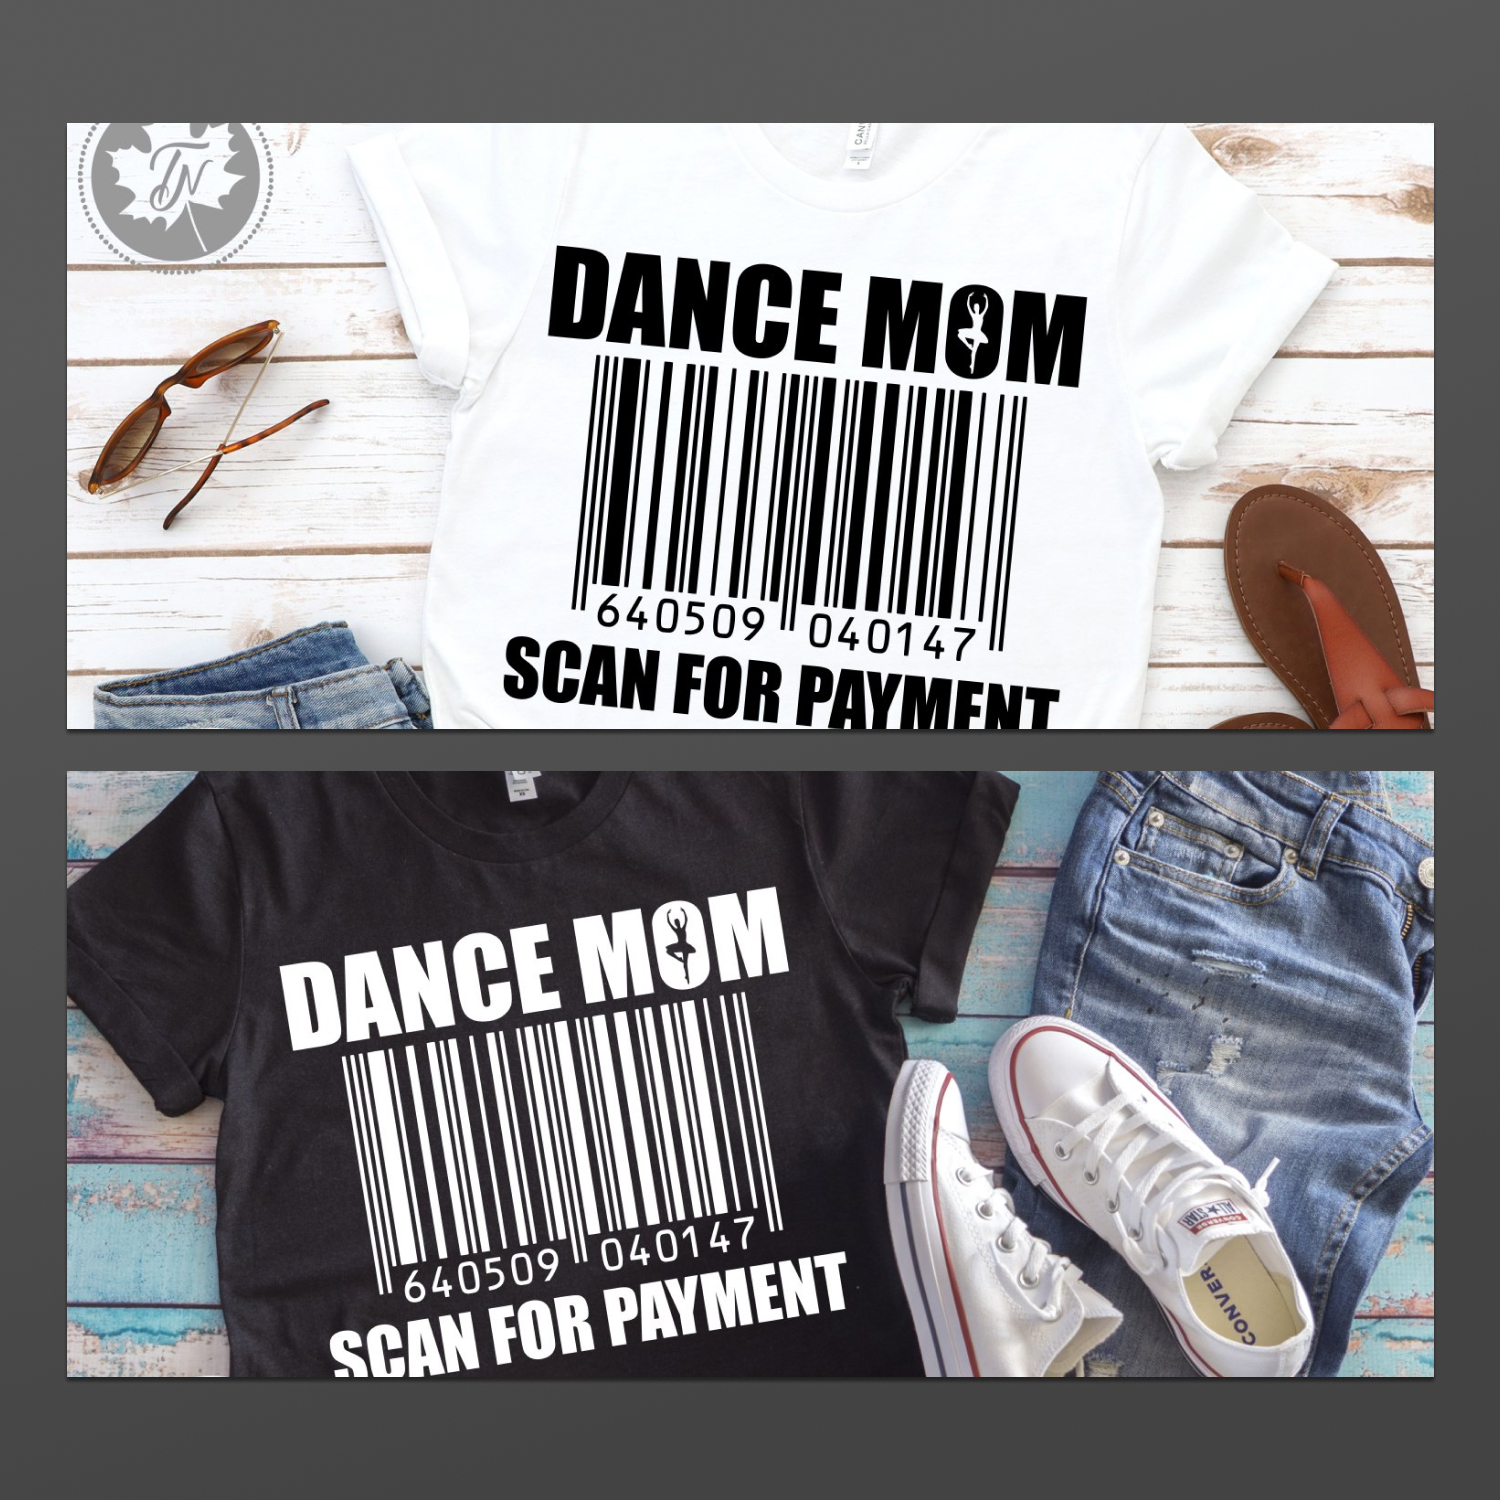 Prints of dance mom scan for payment.